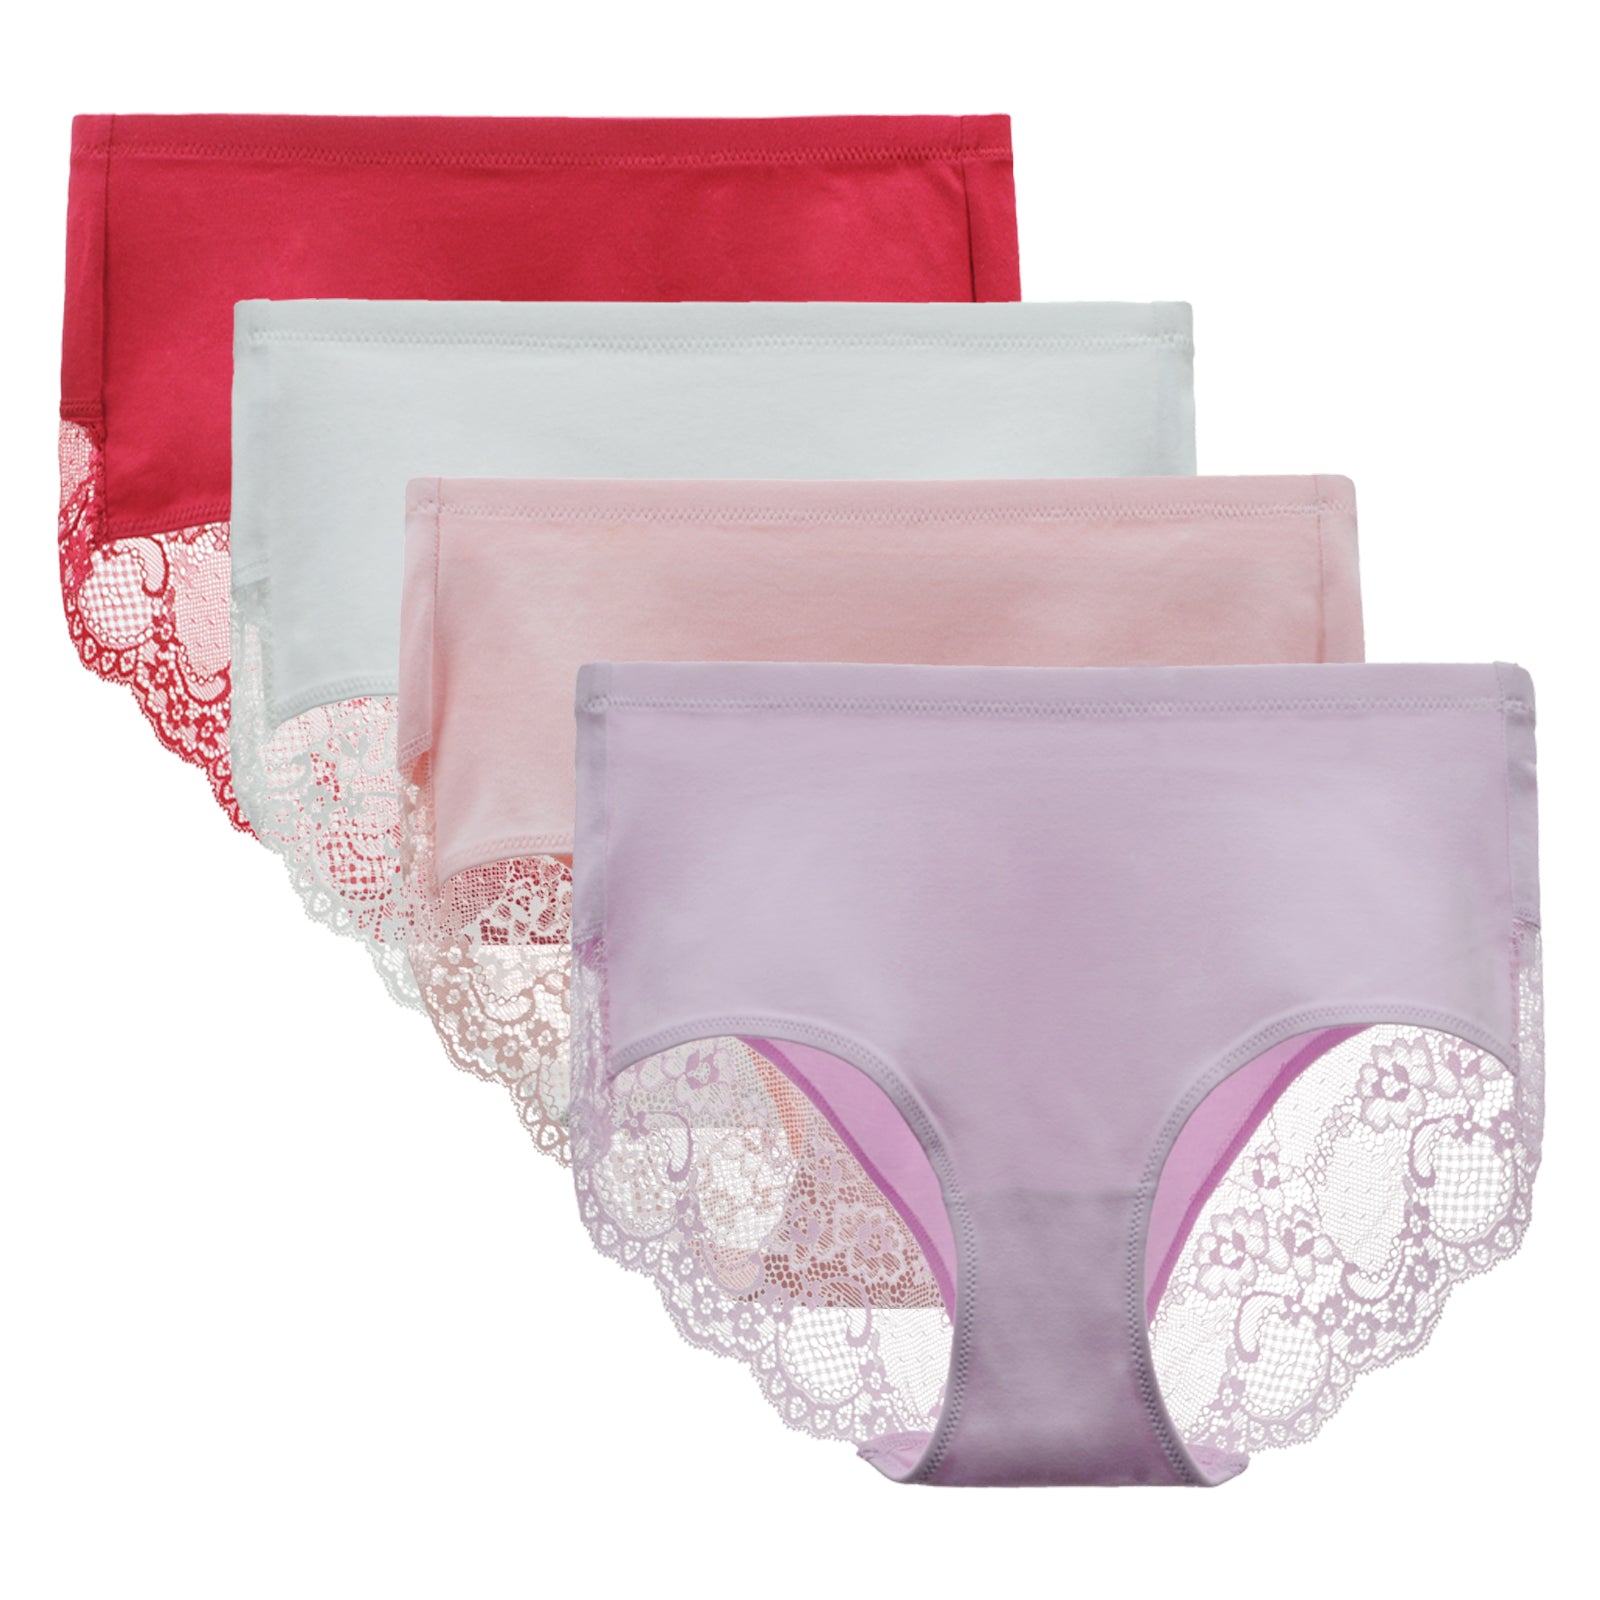 CULAYII High Waisted Women's Underwear Full Coverage Briefs Soft